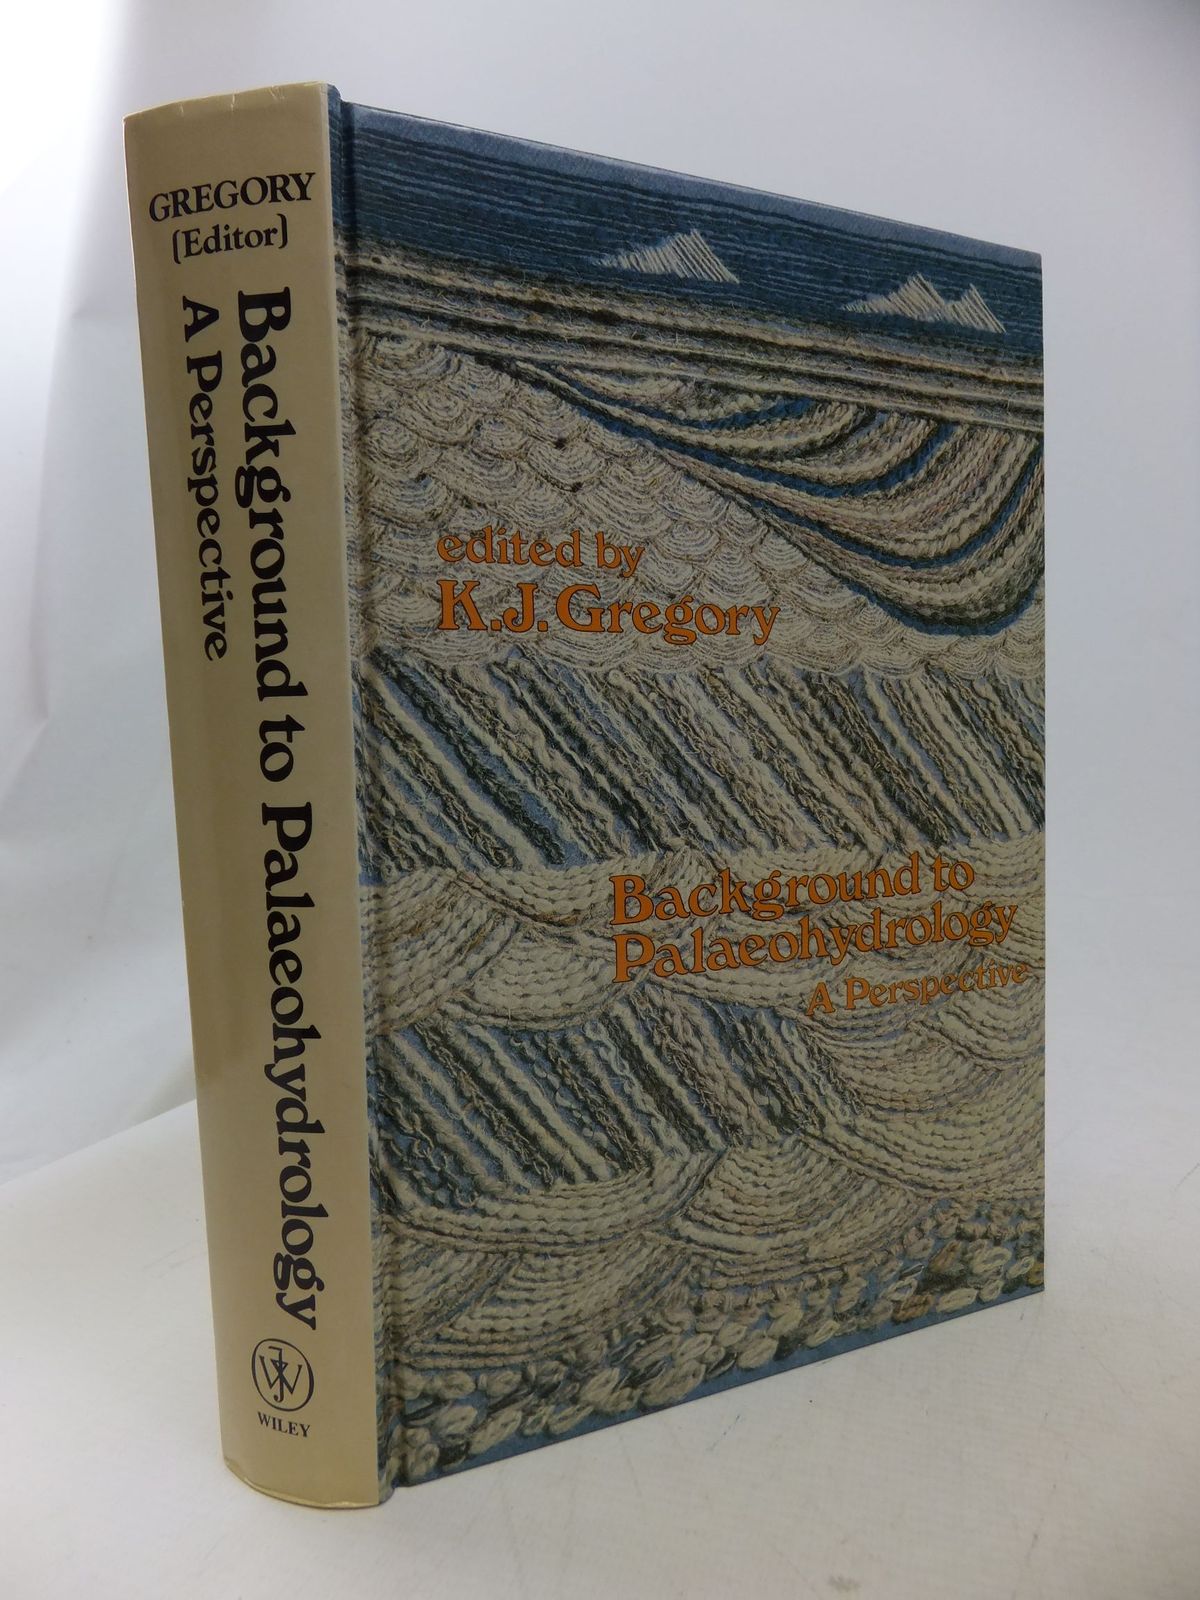 Photo of BACKGROUND TO PALAEOHYDROLOGY A PERSPECTIVE written by Gregory, K.J. published by John Wiley &amp; Sons (STOCK CODE: 1710854)  for sale by Stella & Rose's Books